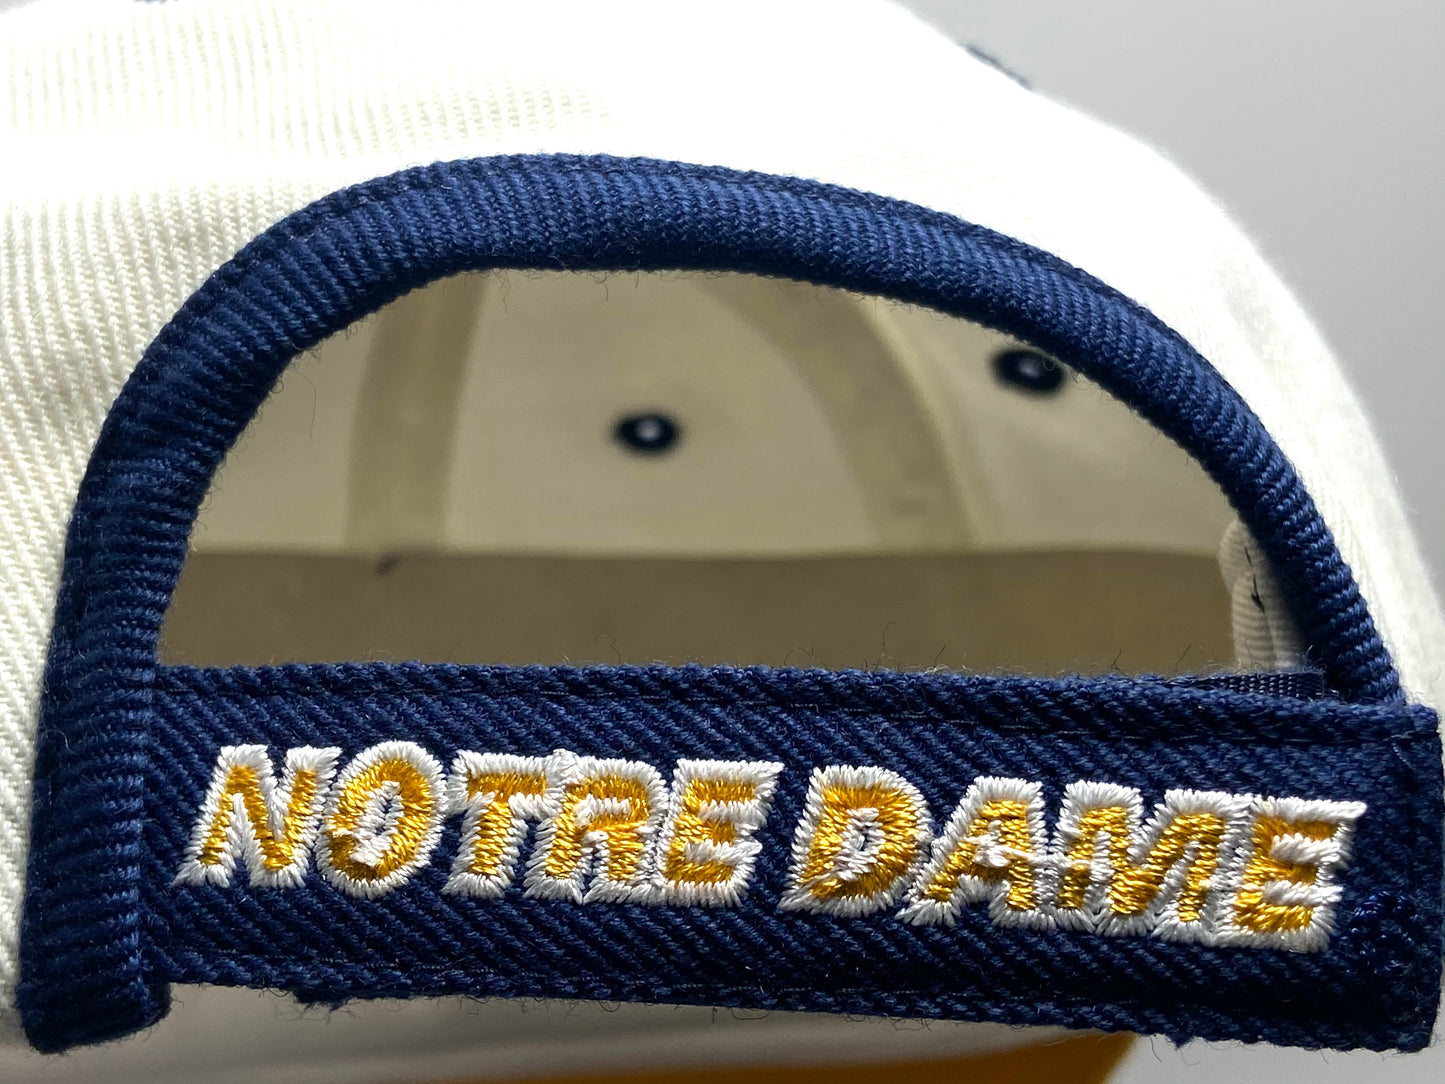 Notre Dame Vintage Late '90s NCAA 20% Wool Logo Cap by Annco